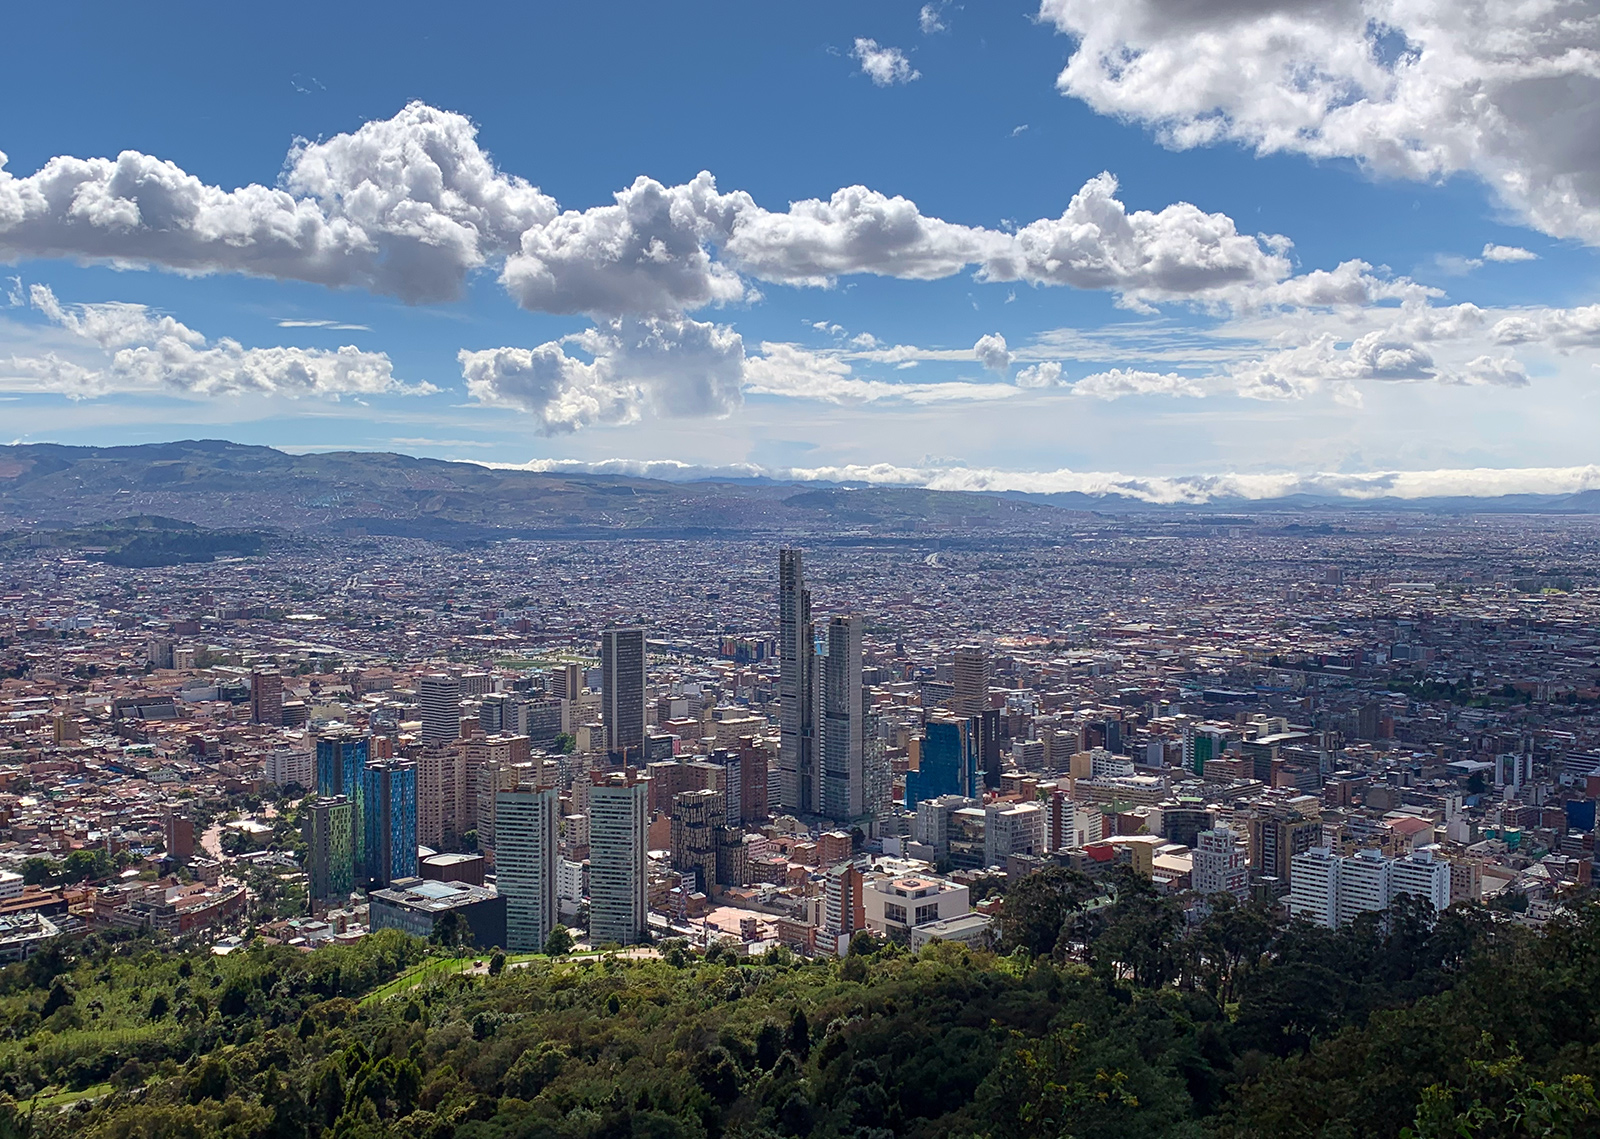 Monserrate views are incredible